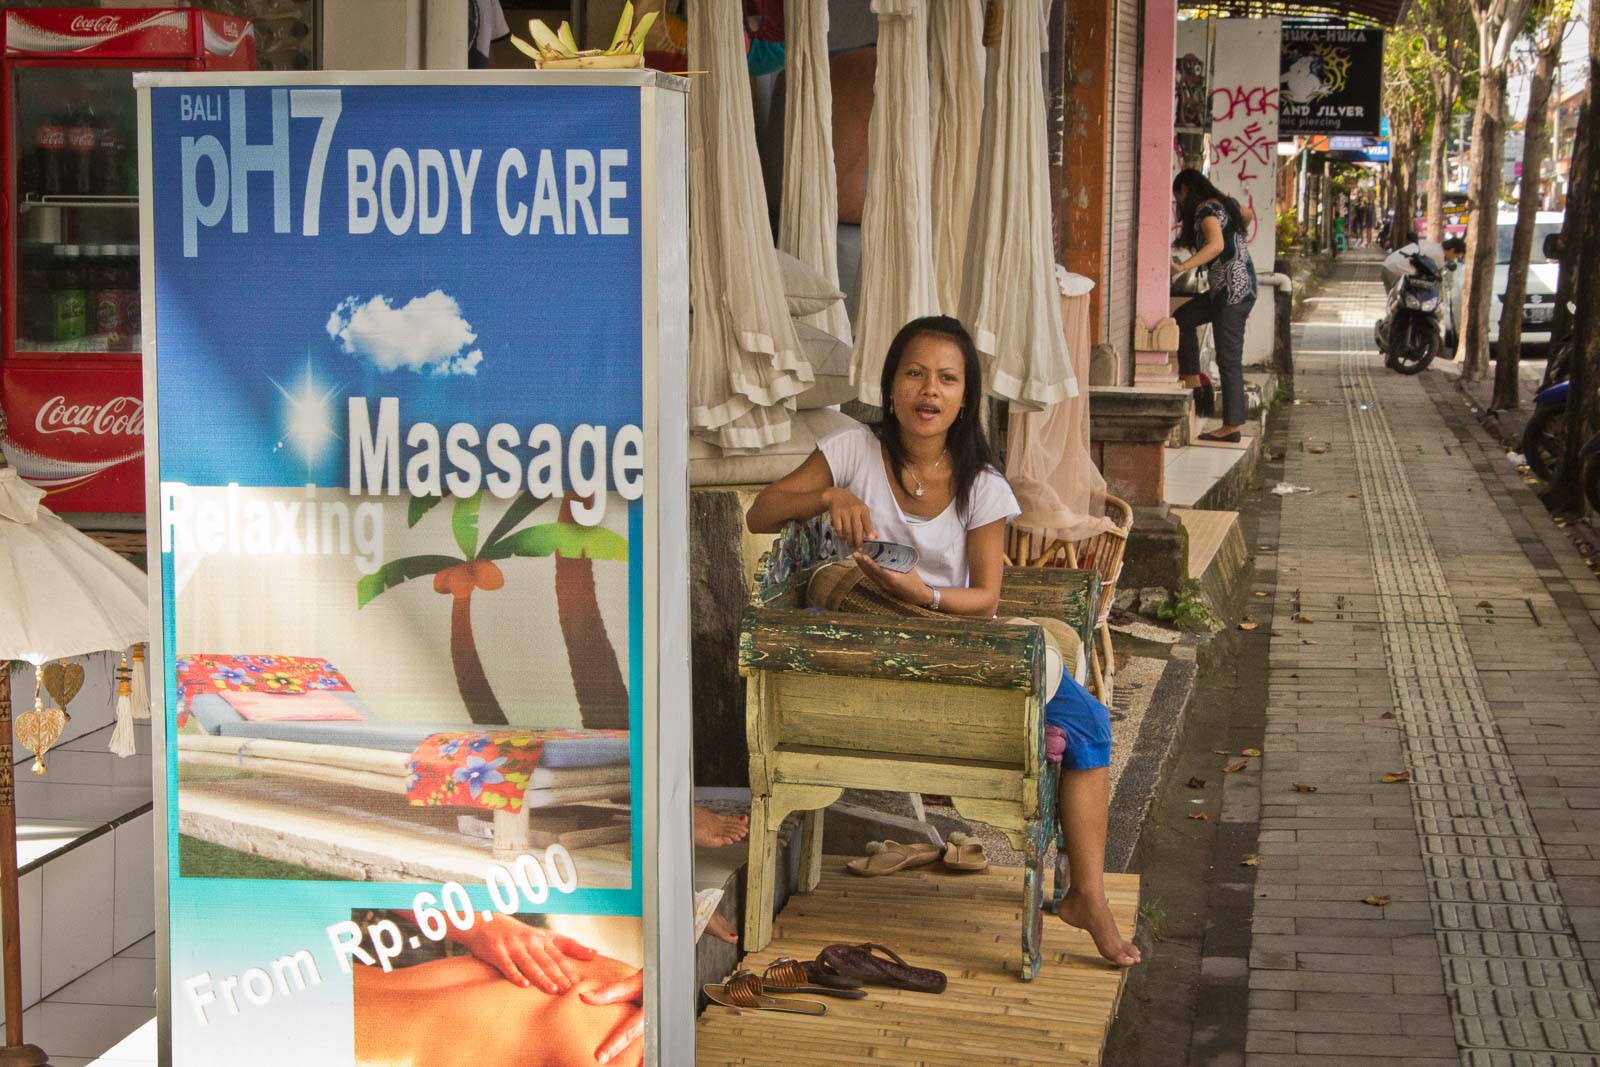 destiny mccall recommends happy ending massage bali pic